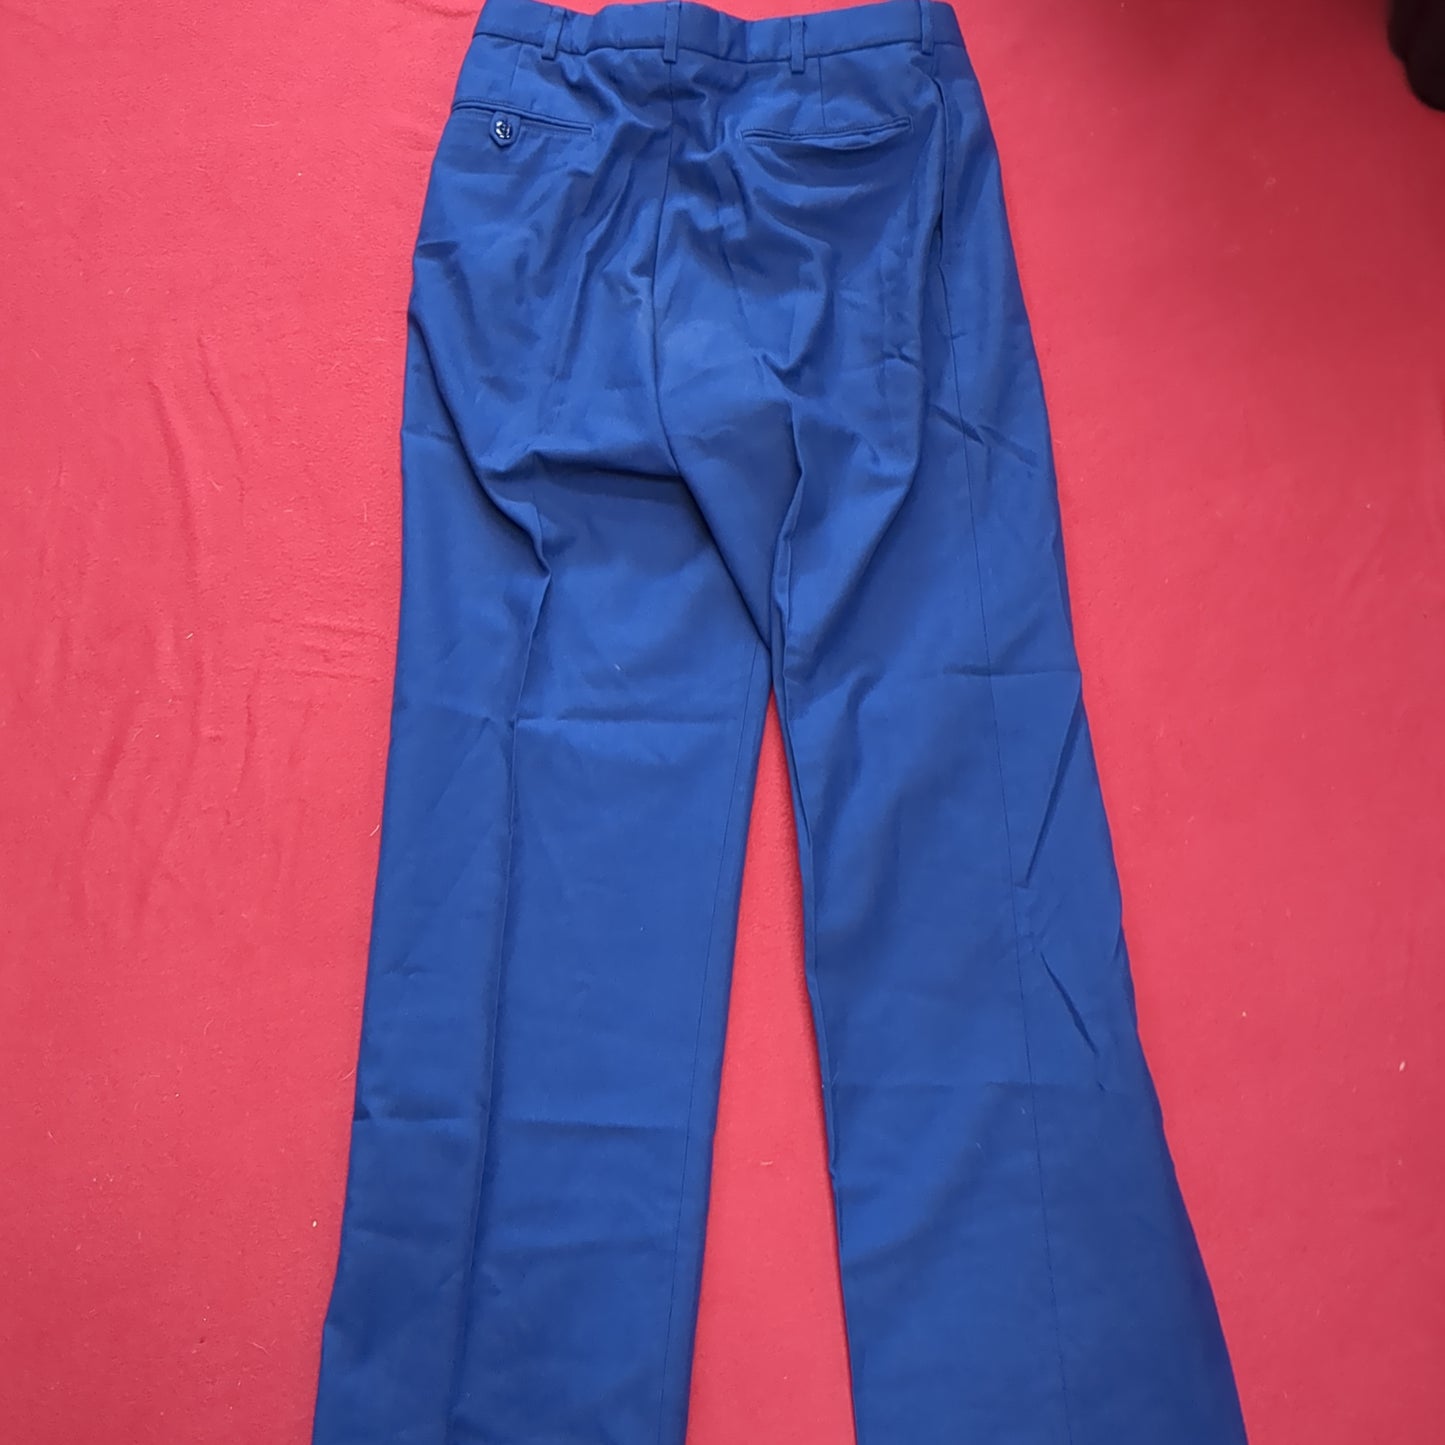 US Army ASU 33x34 Enlisted Unstriped Pants Trouser Dress Blue (31a166)